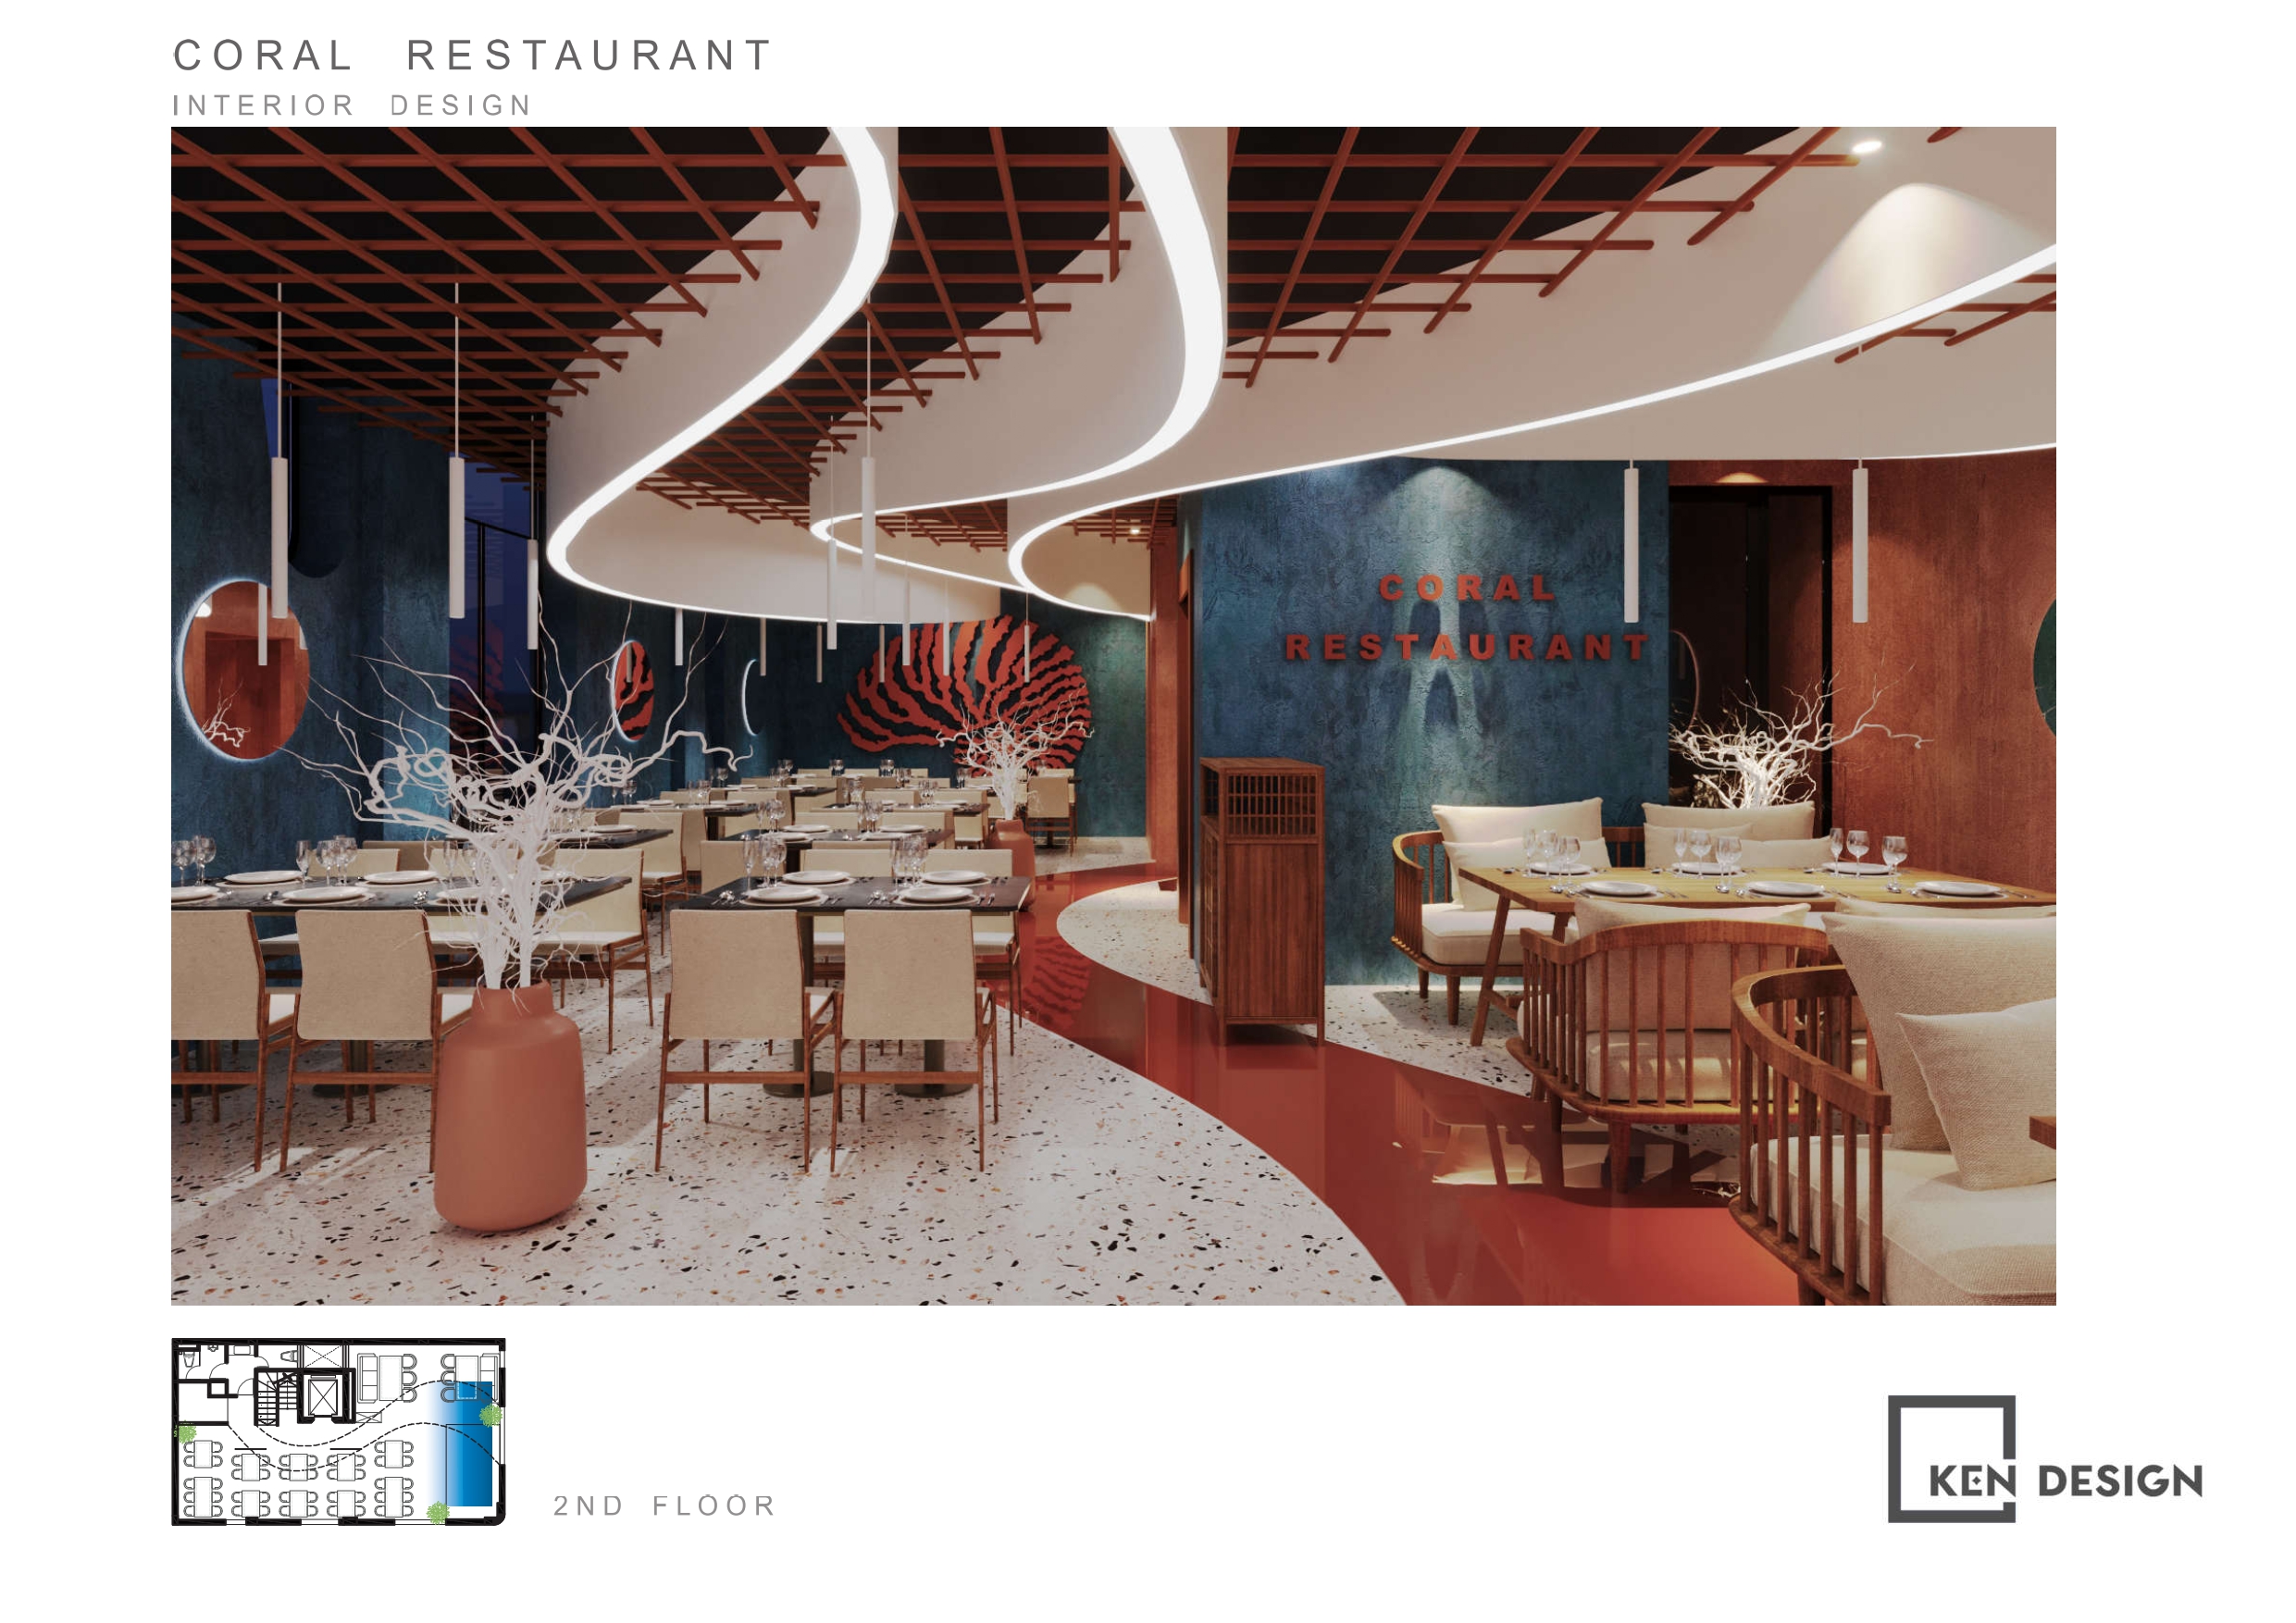 The design of Coral Seafood Restaurant